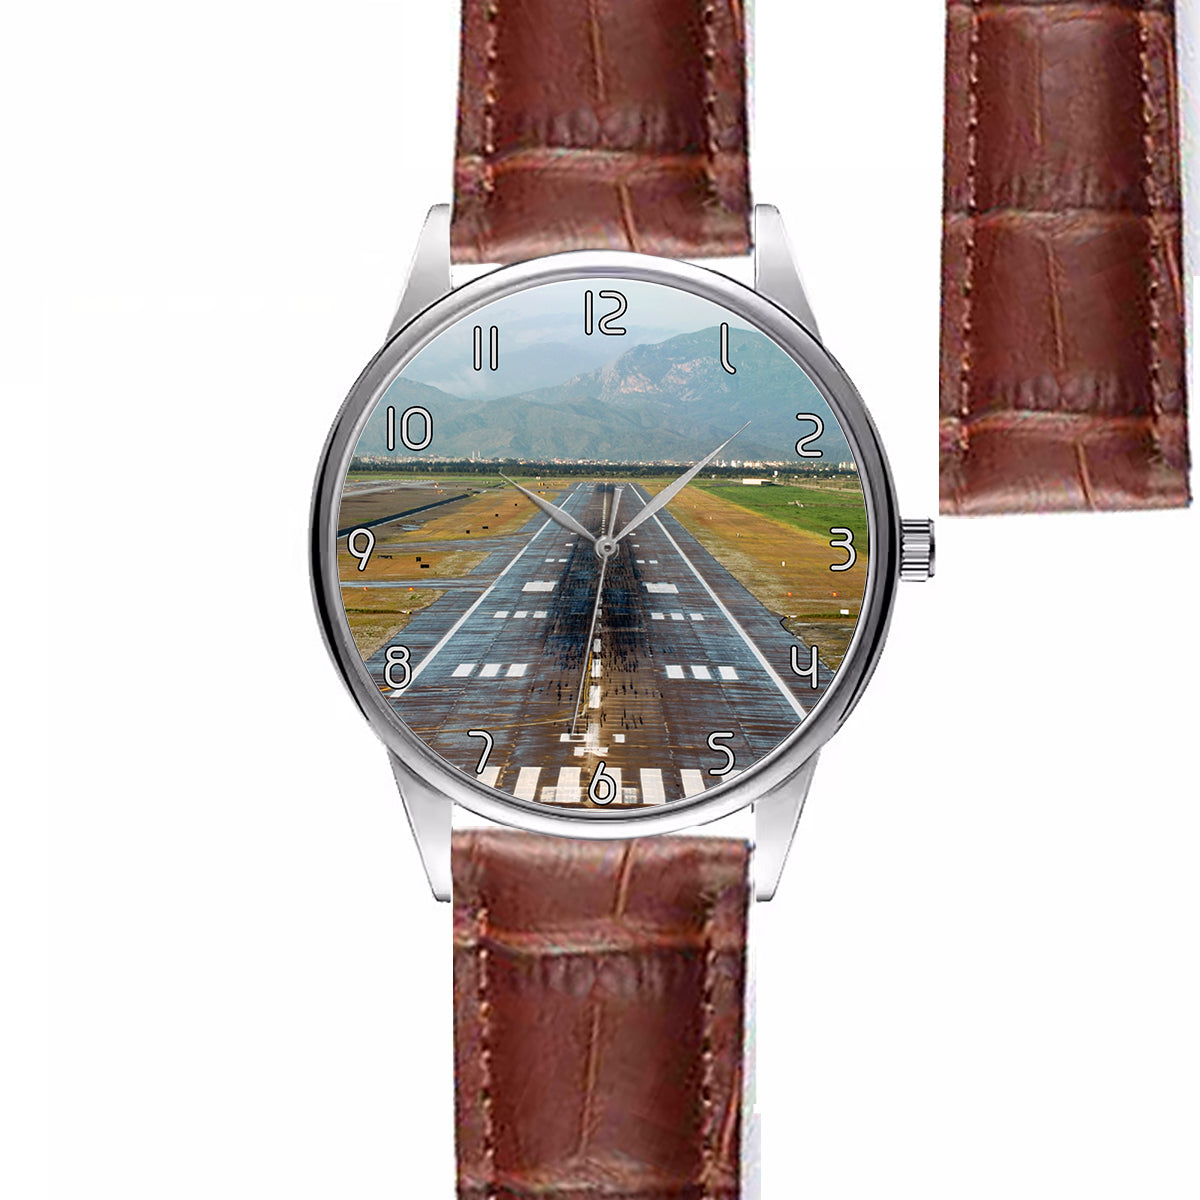 Mountain View and & Runway Designed Fashion Leather Strap Watches